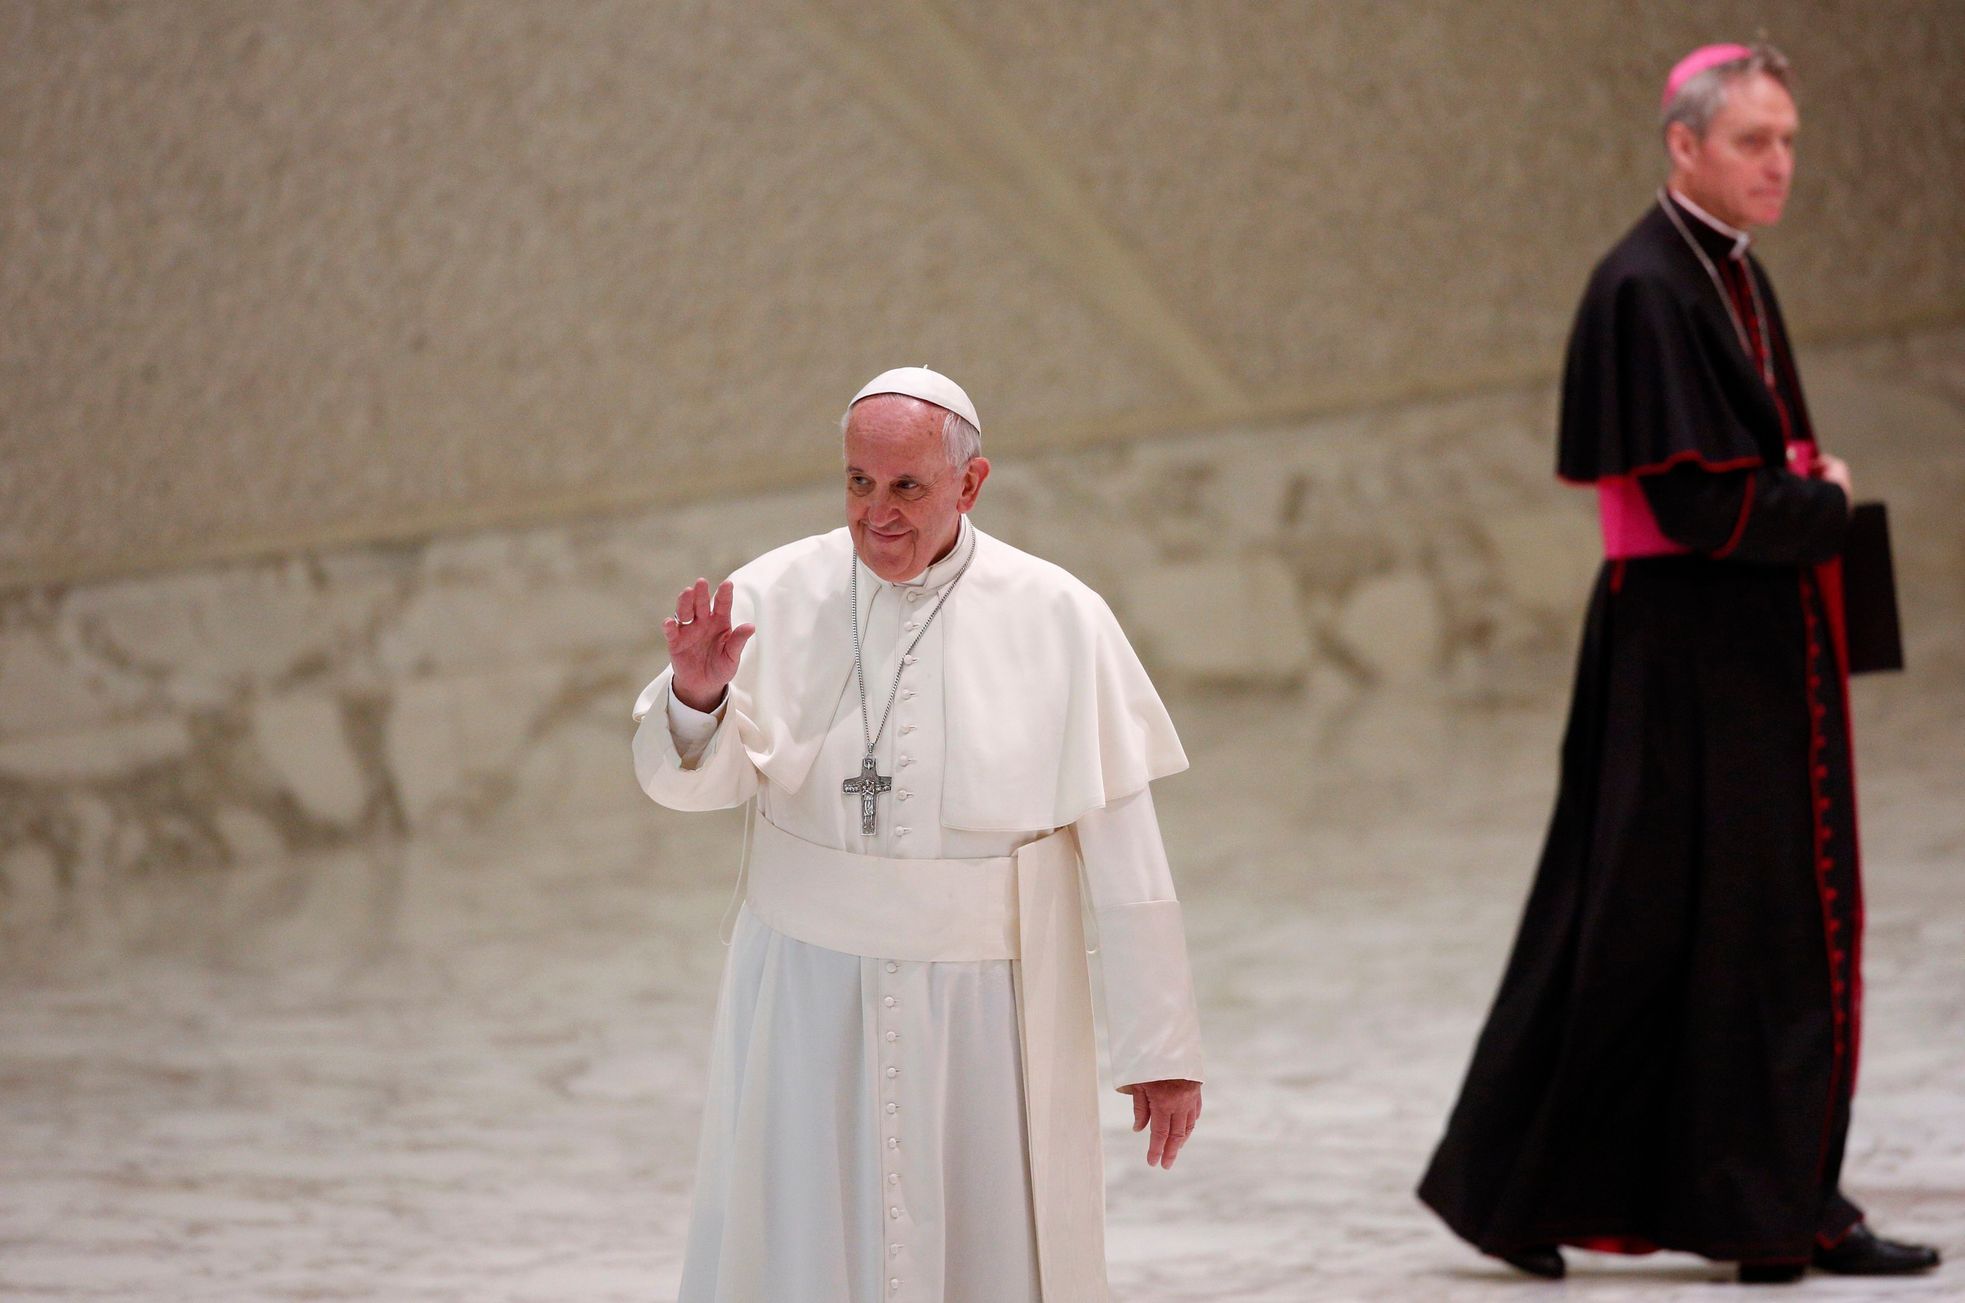 Pope Francis waves as he arrives to lead a special audience at the Paul VI' hall at the Vatican